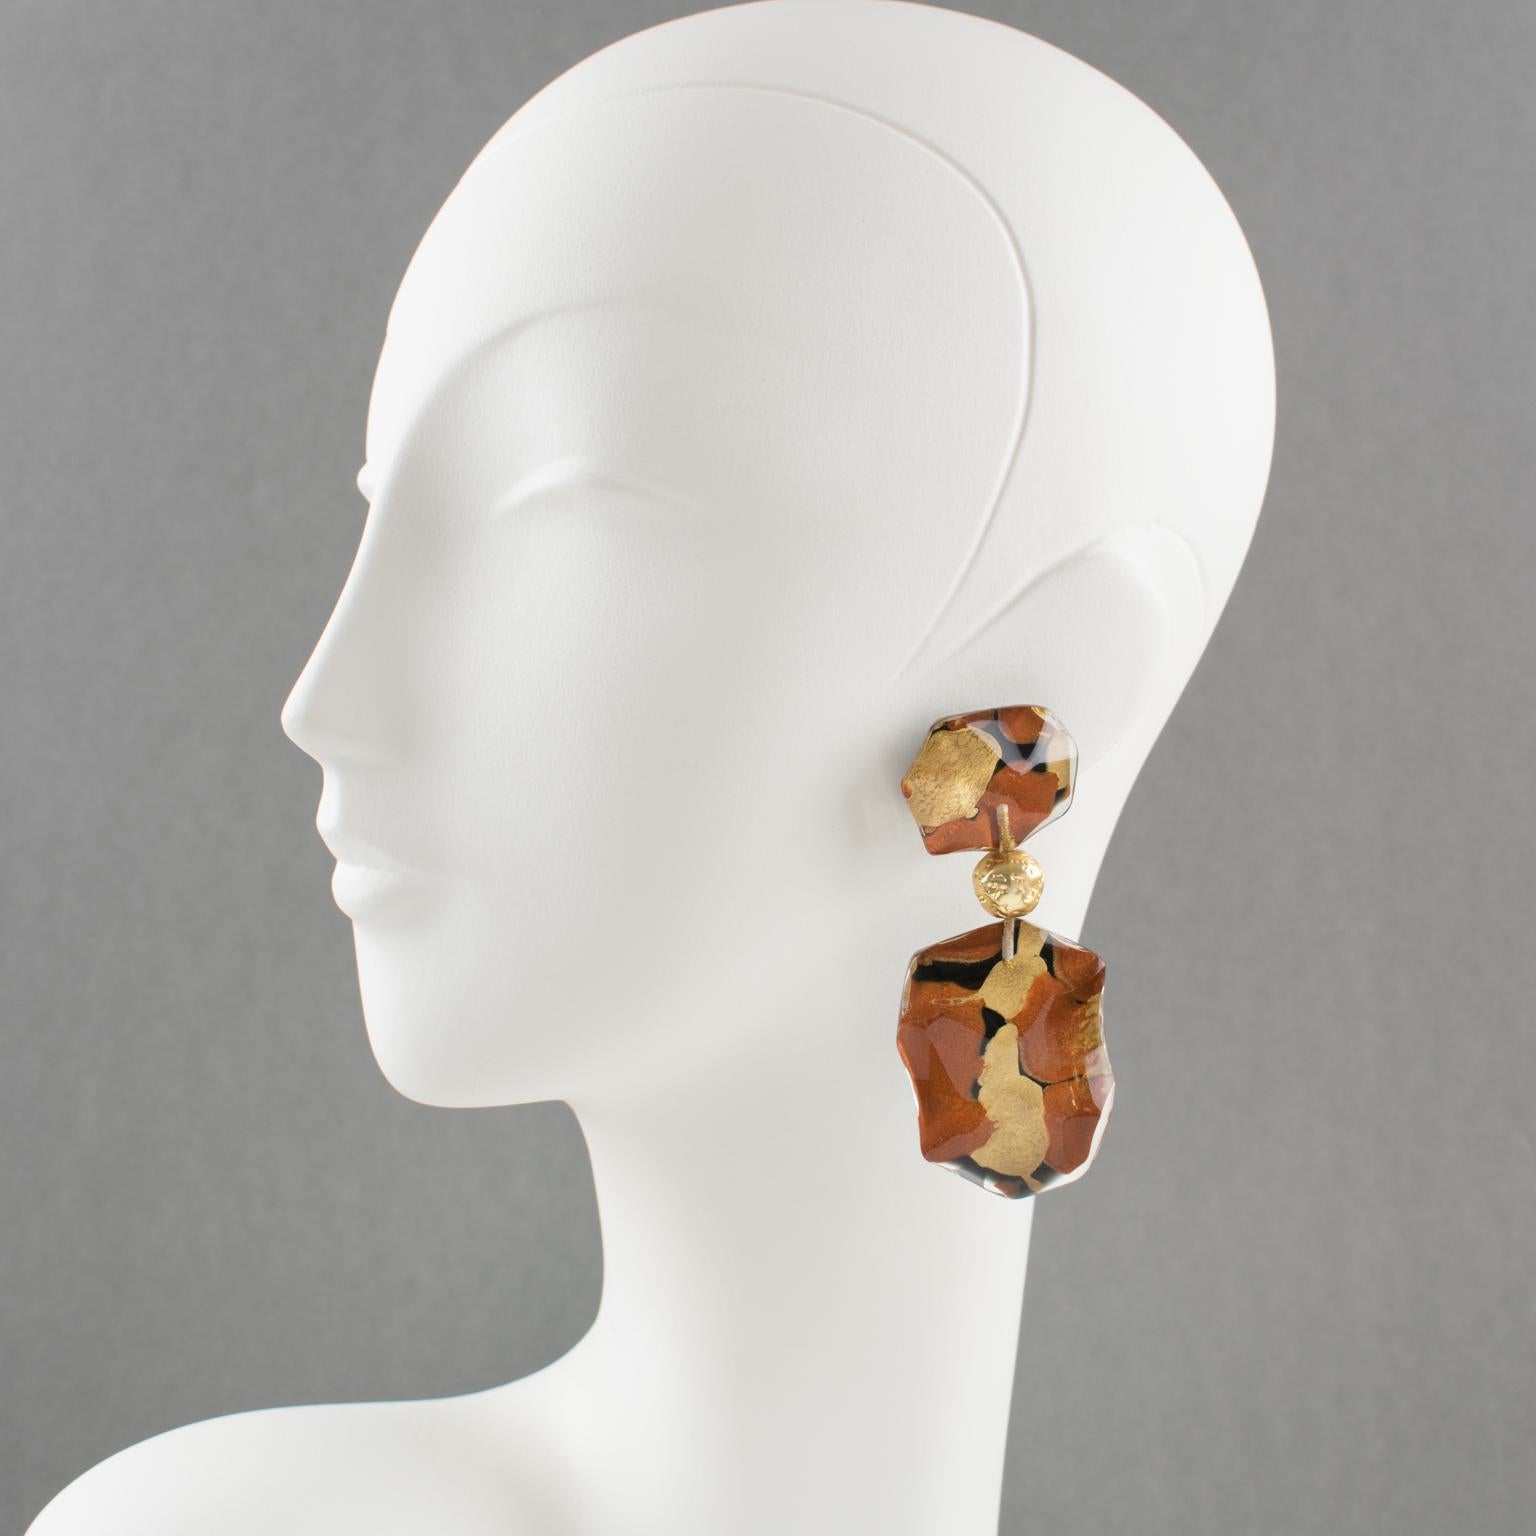 Exquisite oversized Lucite clip-on earrings designed by Harriet Bauknight for Kaso. Dangling shape with an asymmetric design featuring dimensional domed lucite elements with beveling. Clear Lucite with bronze and copper color inclusions with